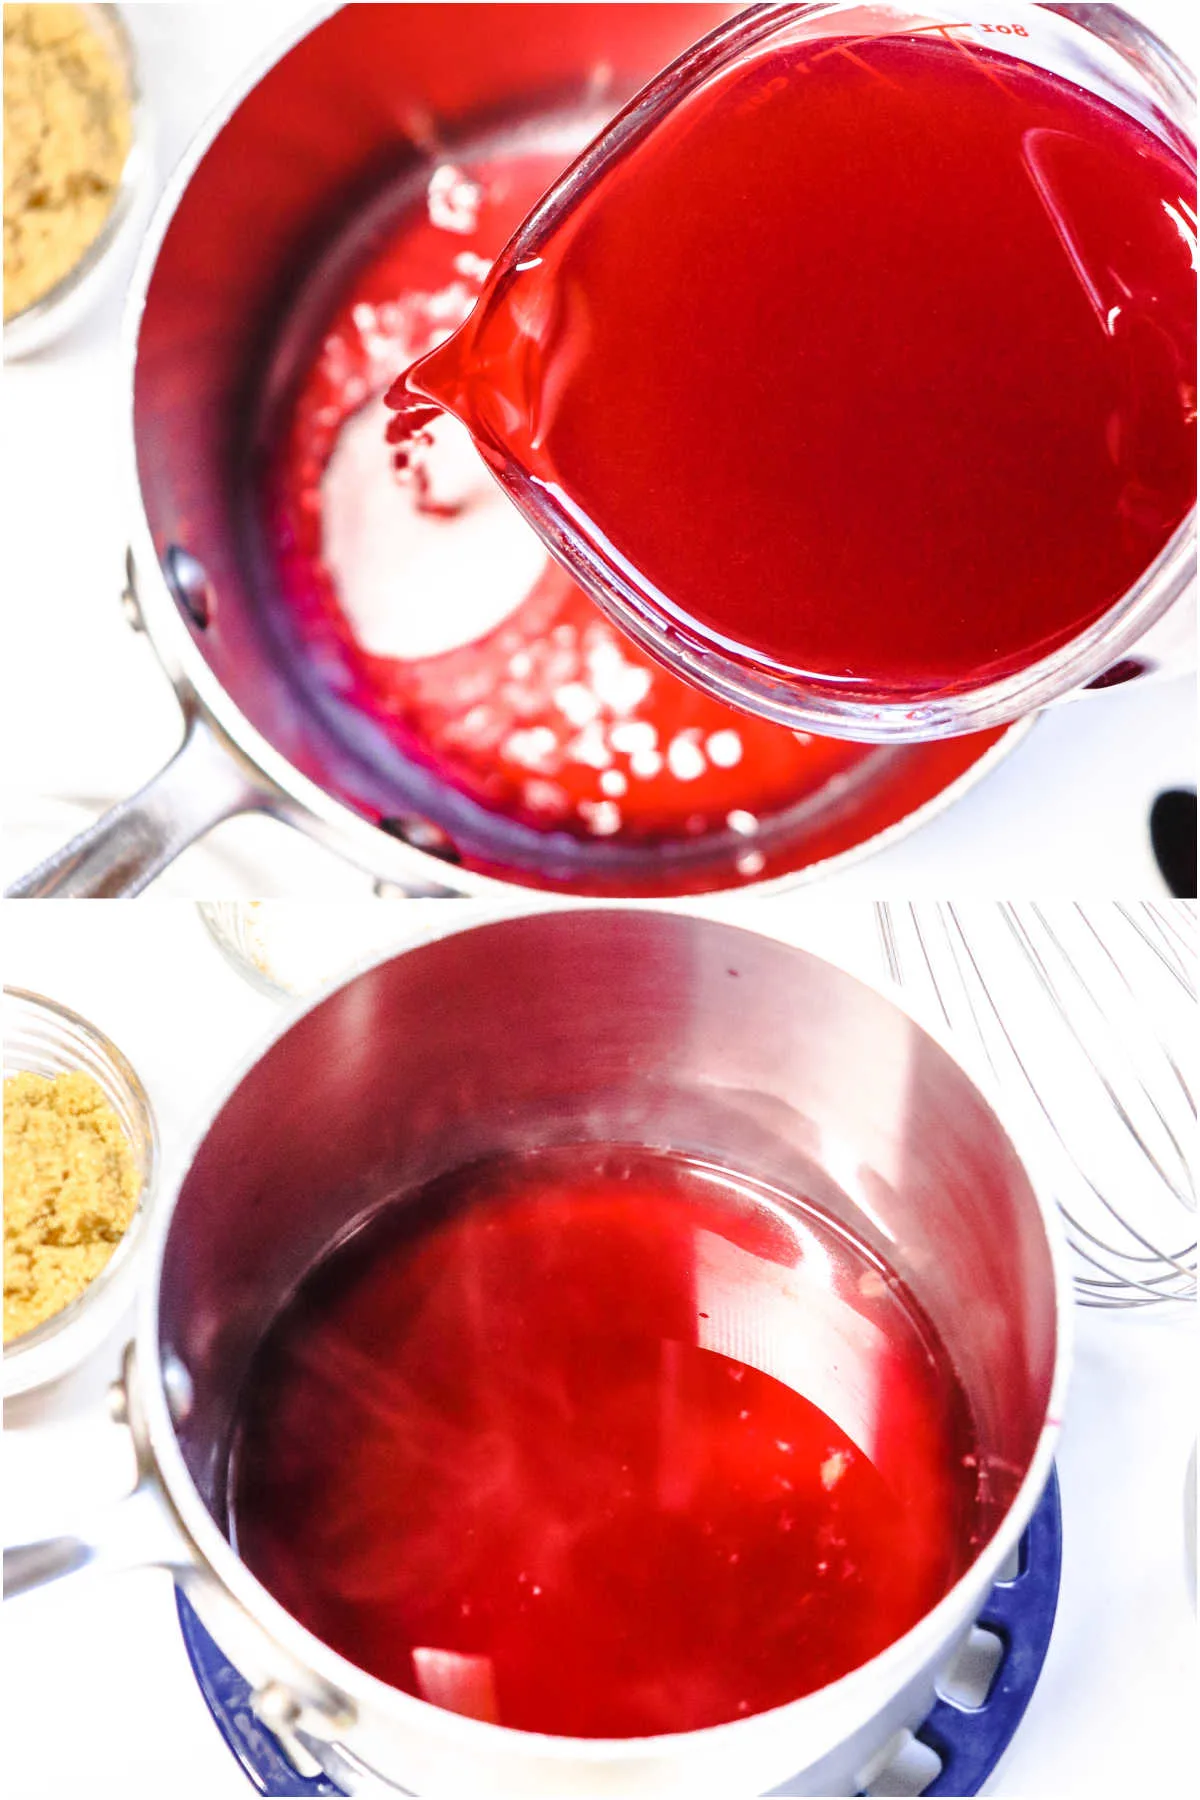 Liquid from the cherries was poured into a saucepan and then boiled.